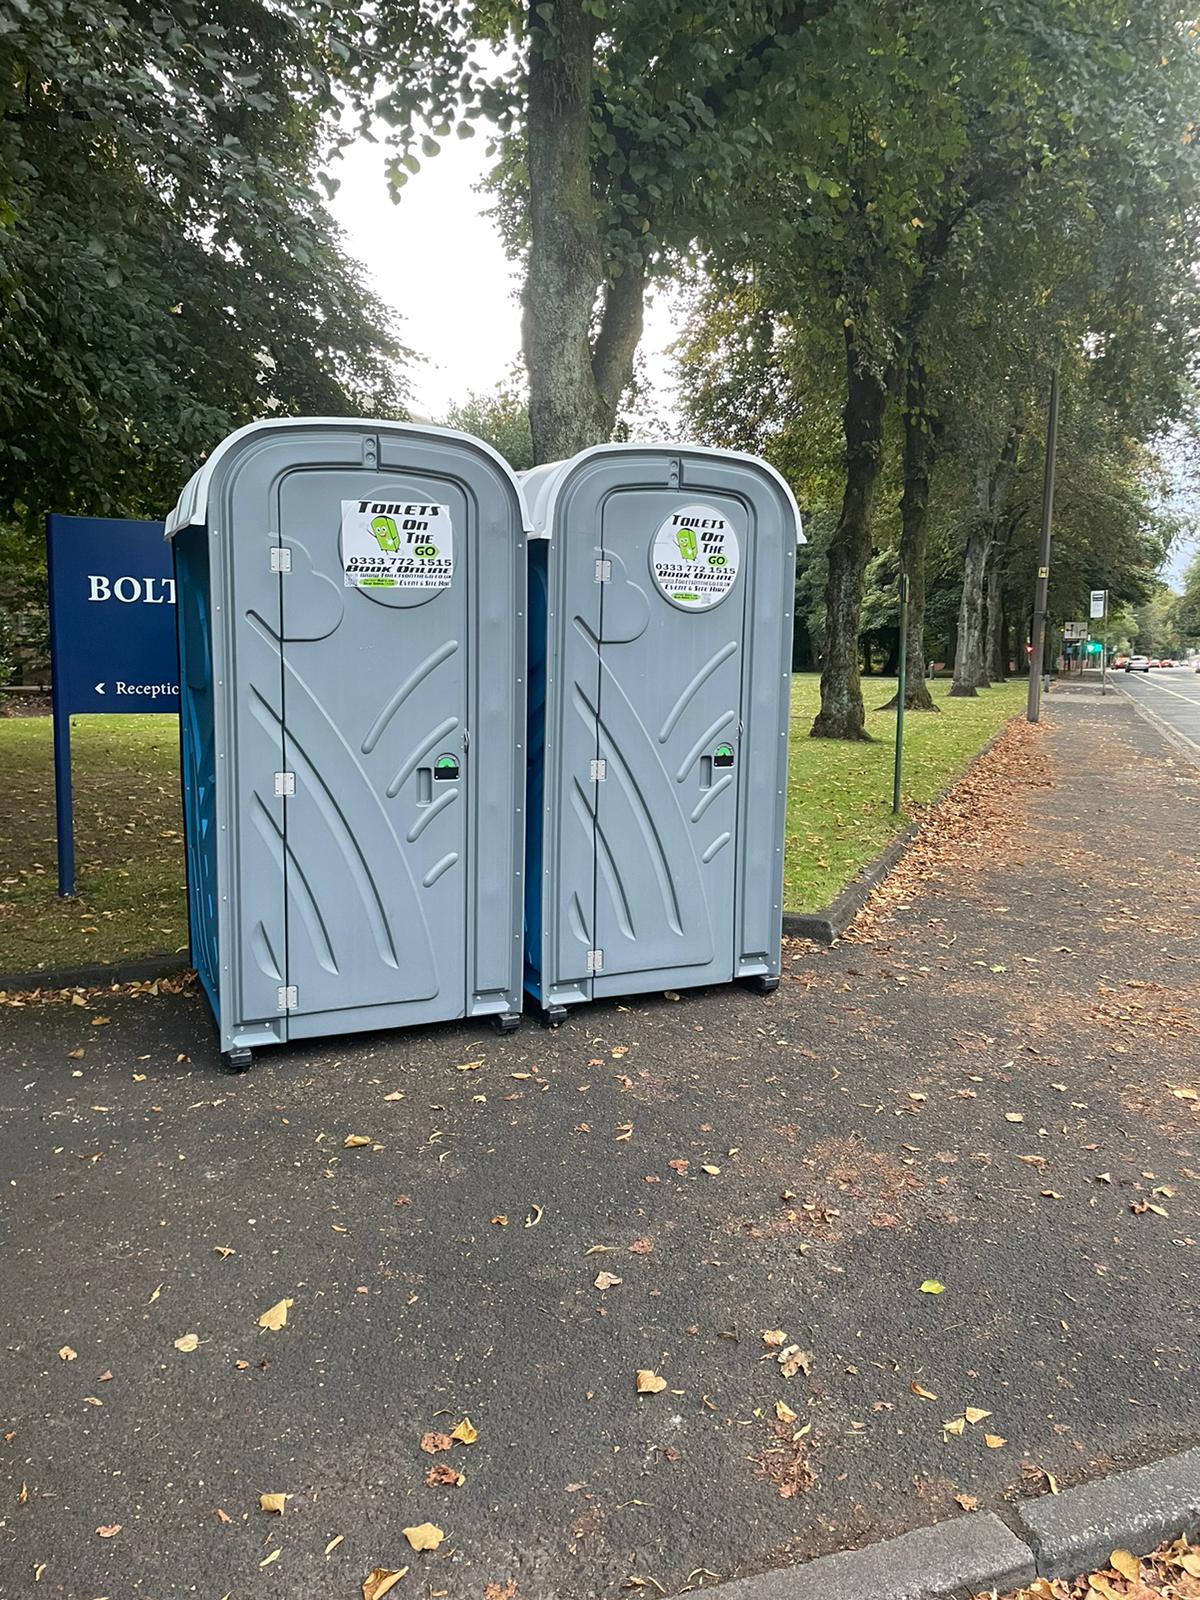 Gallery | Portable Toilet Loo Hire Rental Company in North West uk and Manchester gallery image 39